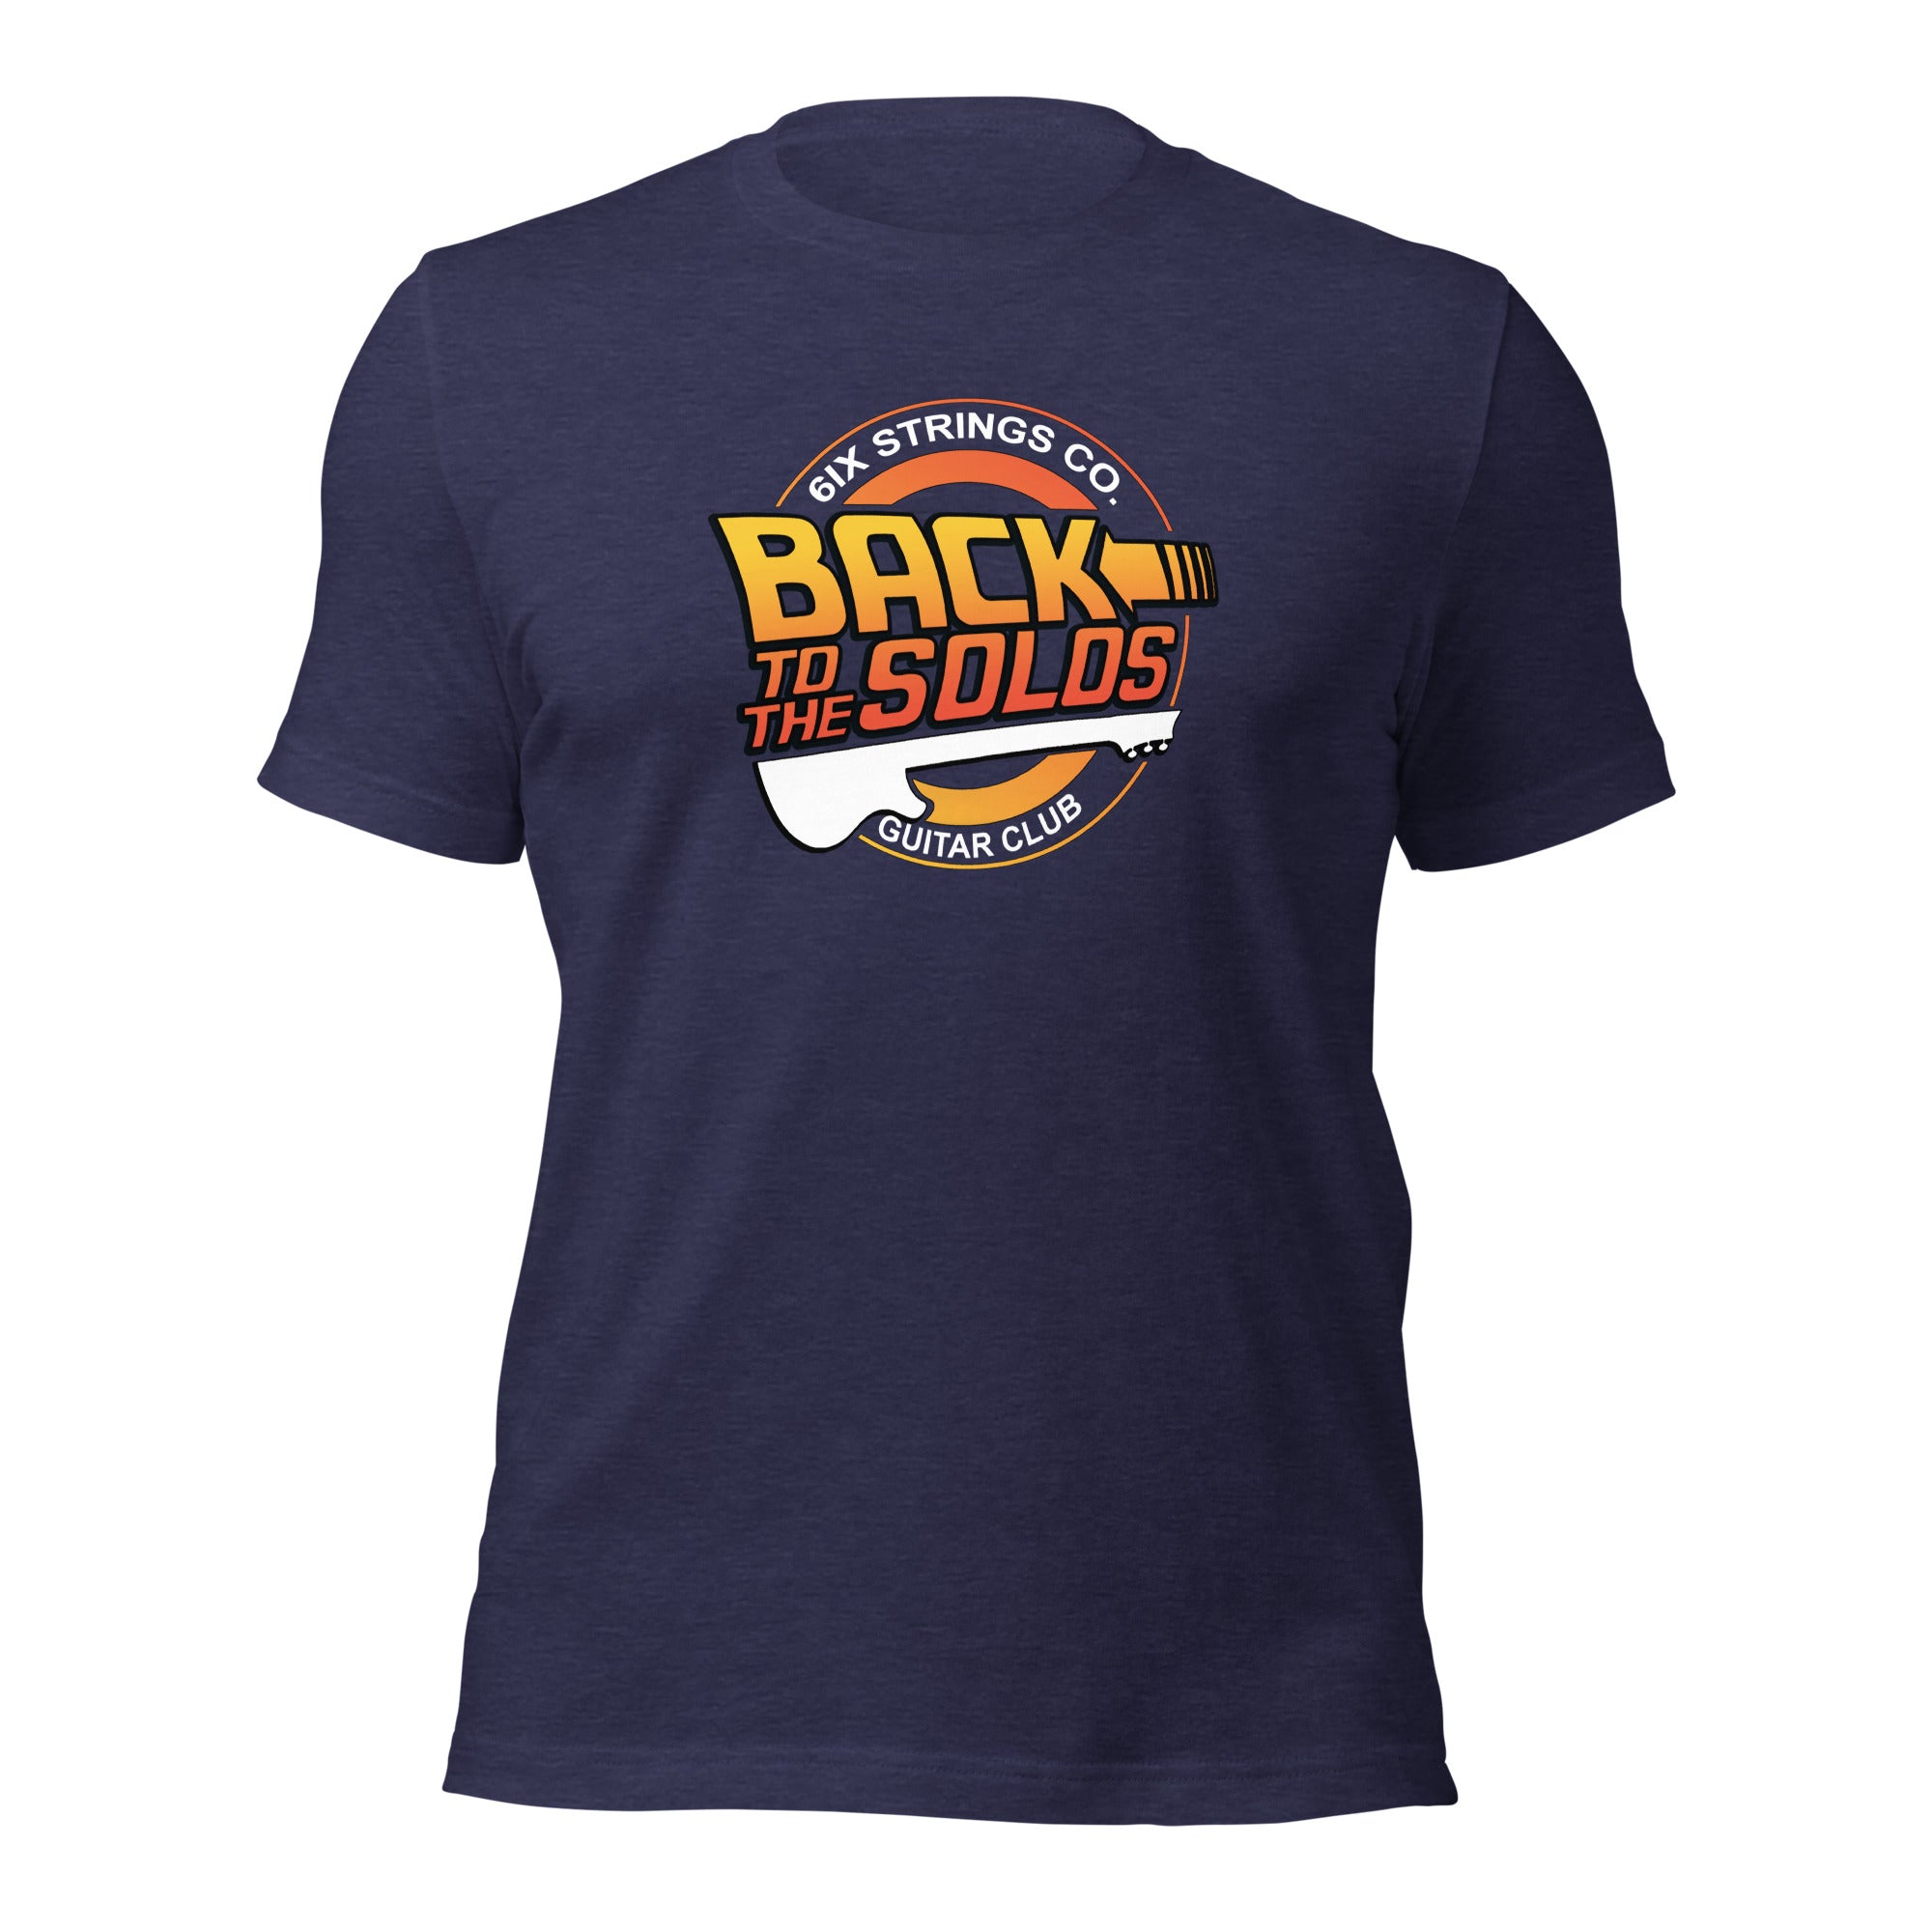 'Back To The Solos' - Blue Tee